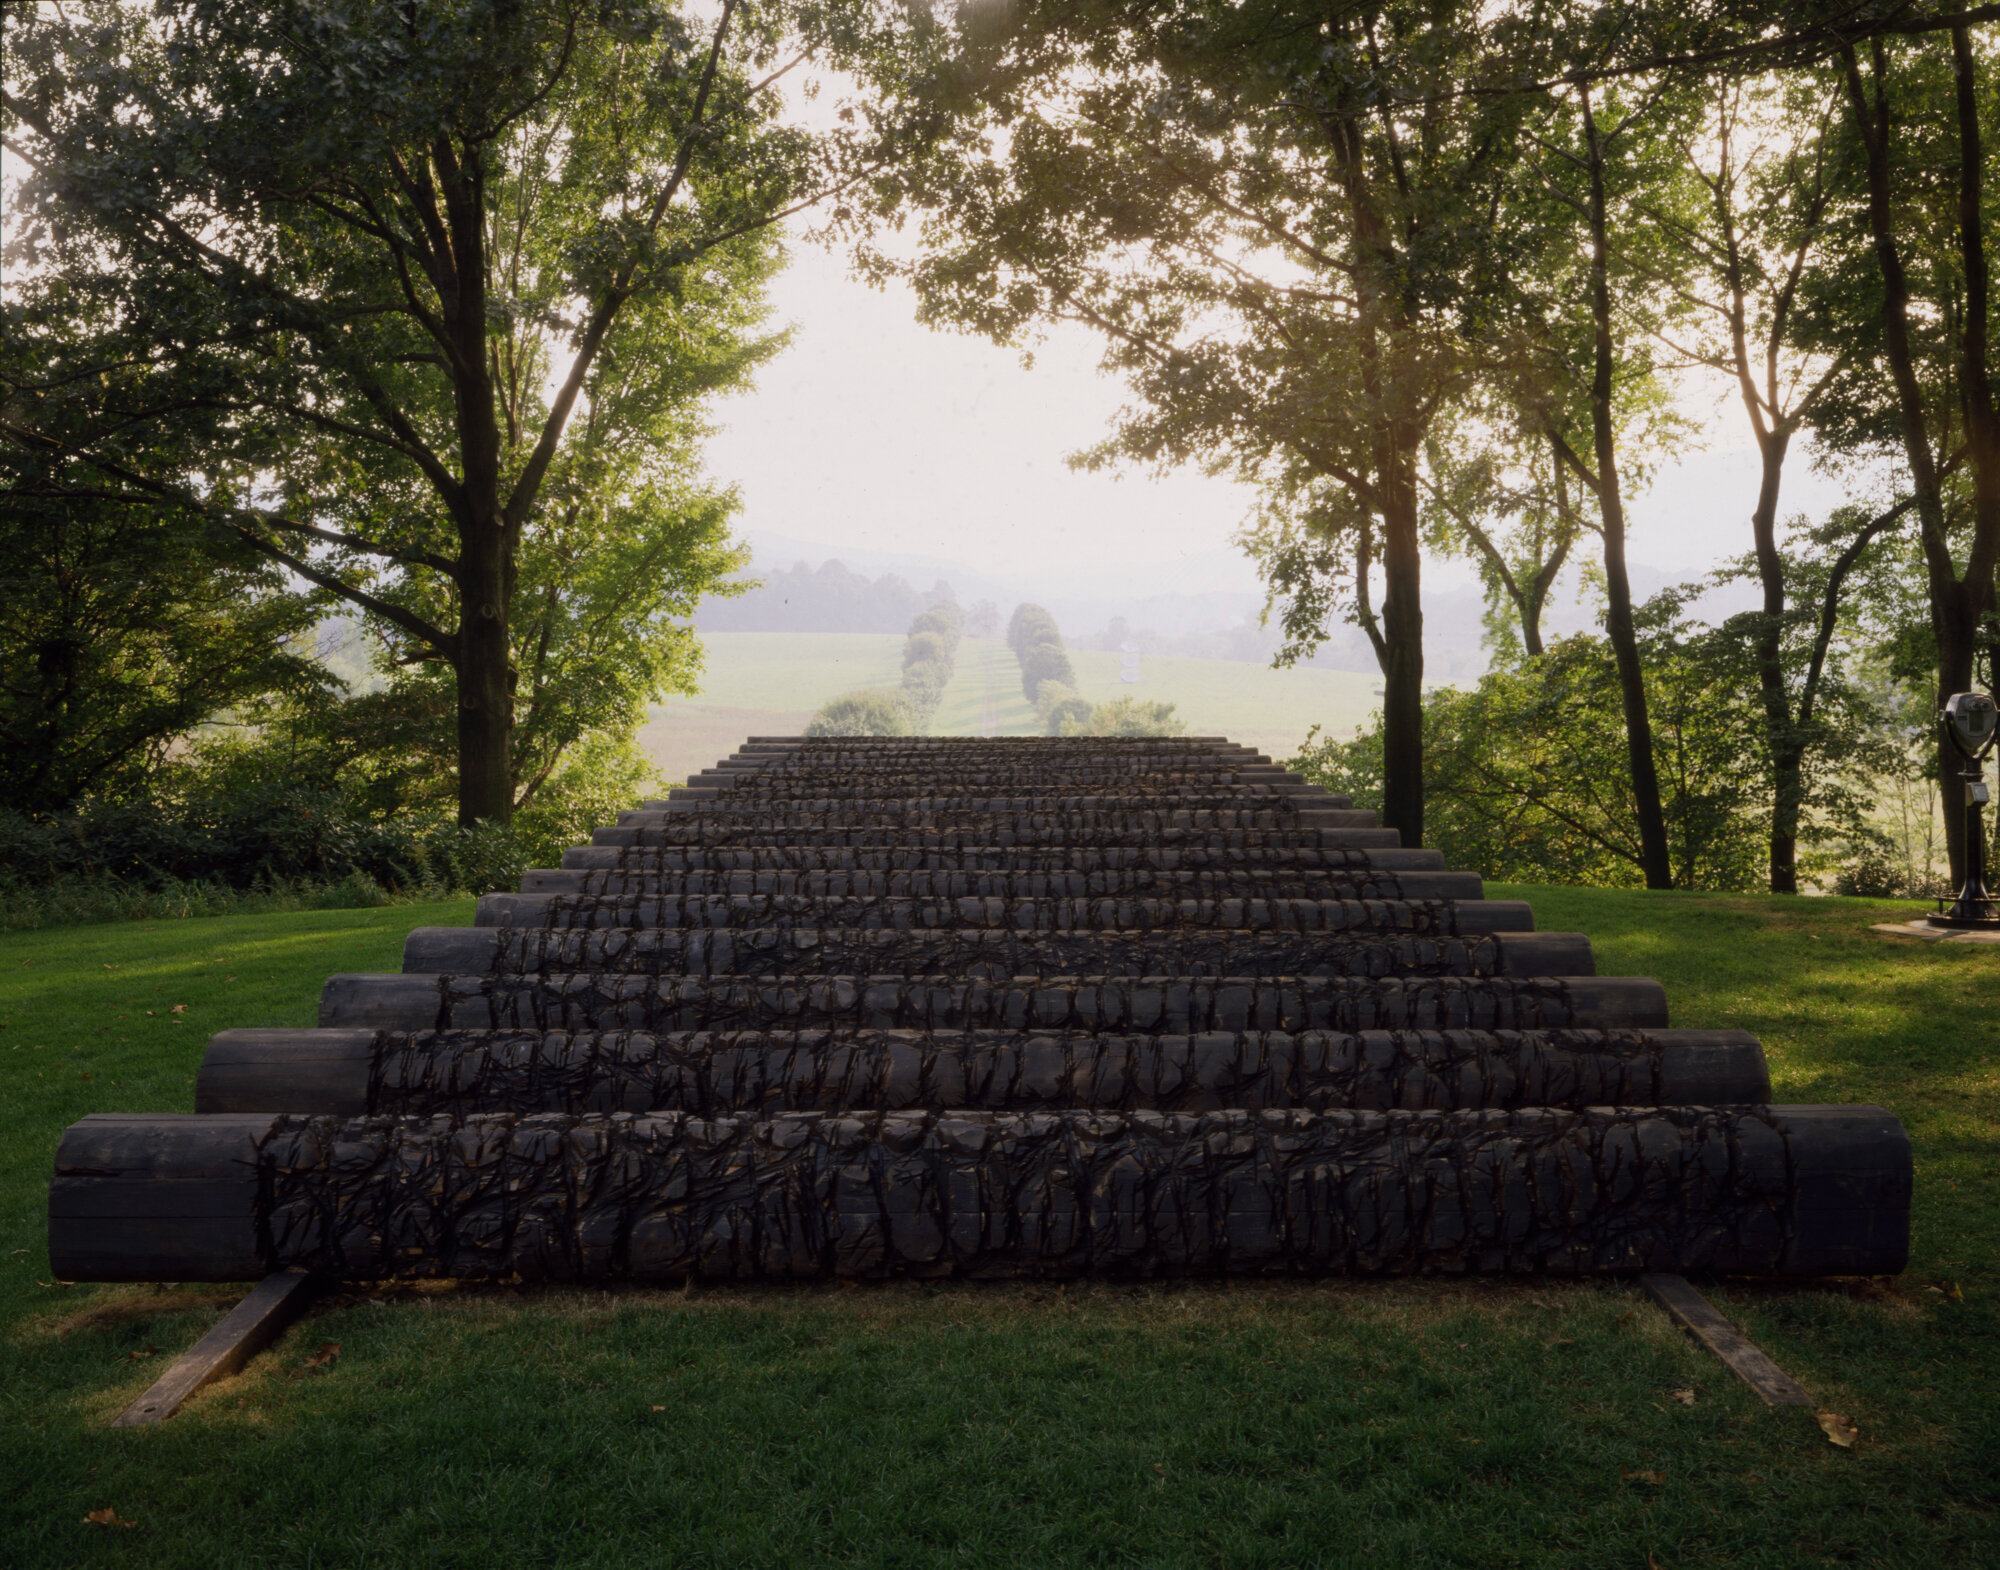       Land Rollers , 1992 Cedar and graphite 45 x 670 x 171.5 in.    MORE IMAGES   Storm King Art Center  